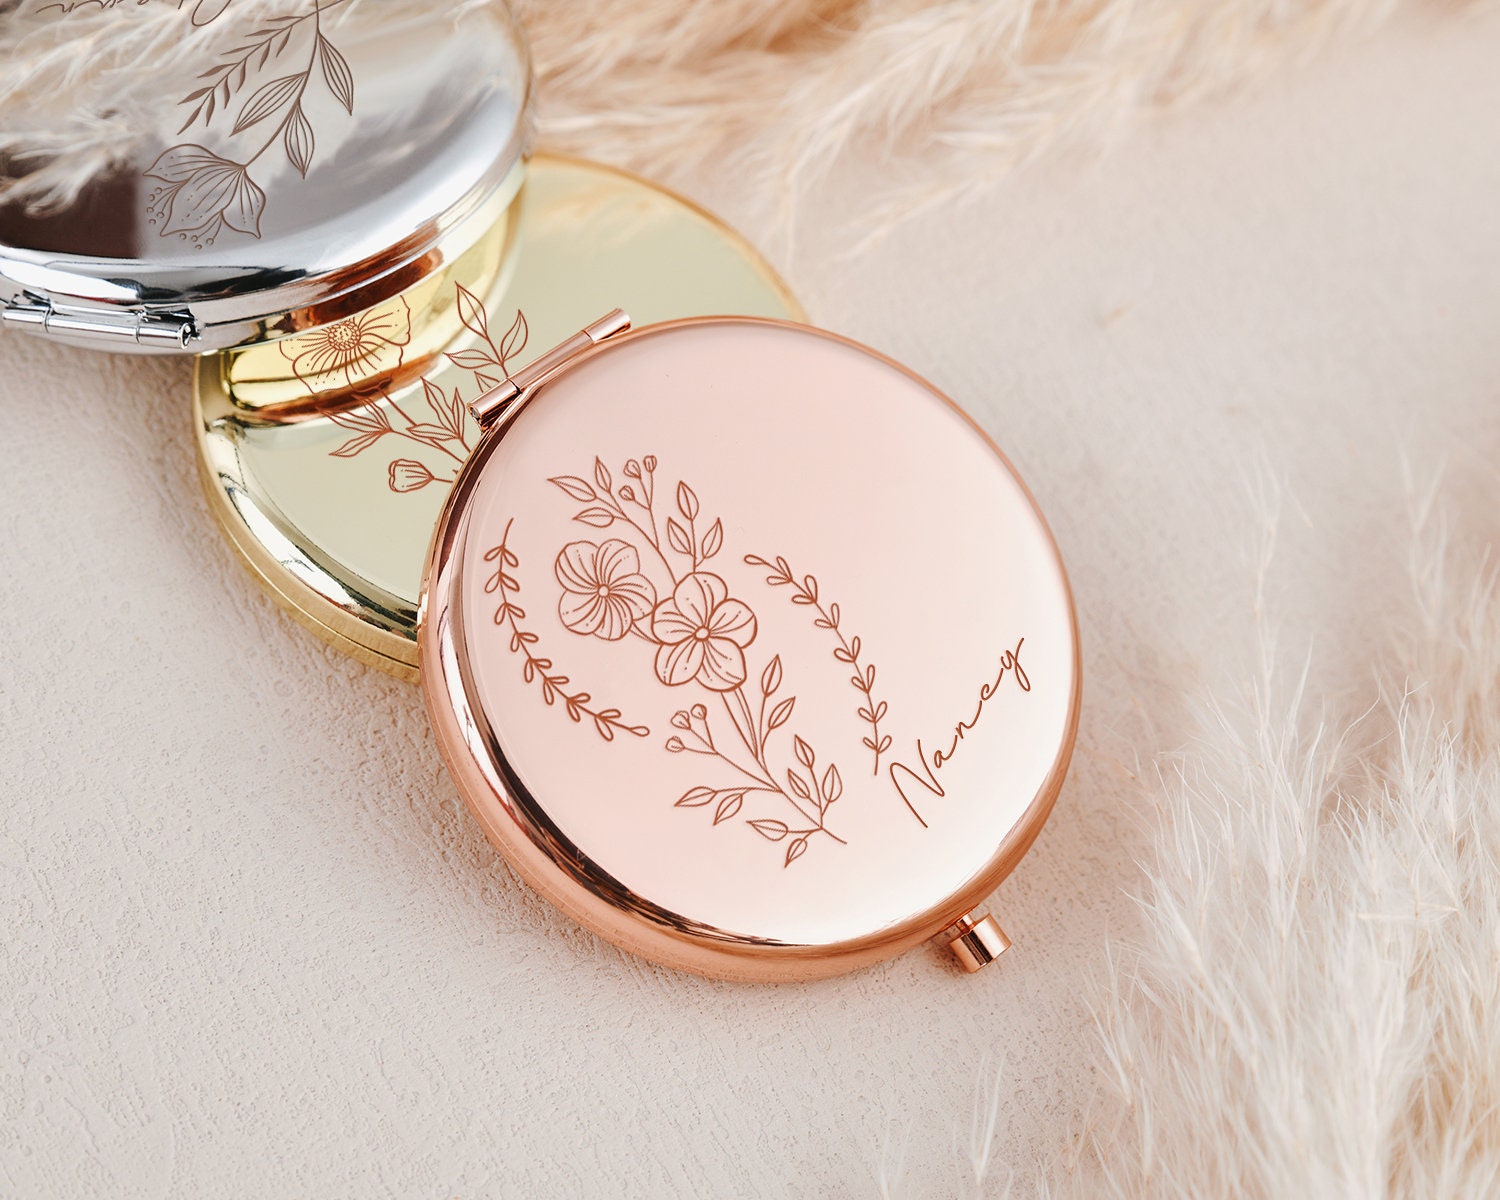 wadbeev Set of 5-10 Rose Gold Compact Mirrors with Your Name